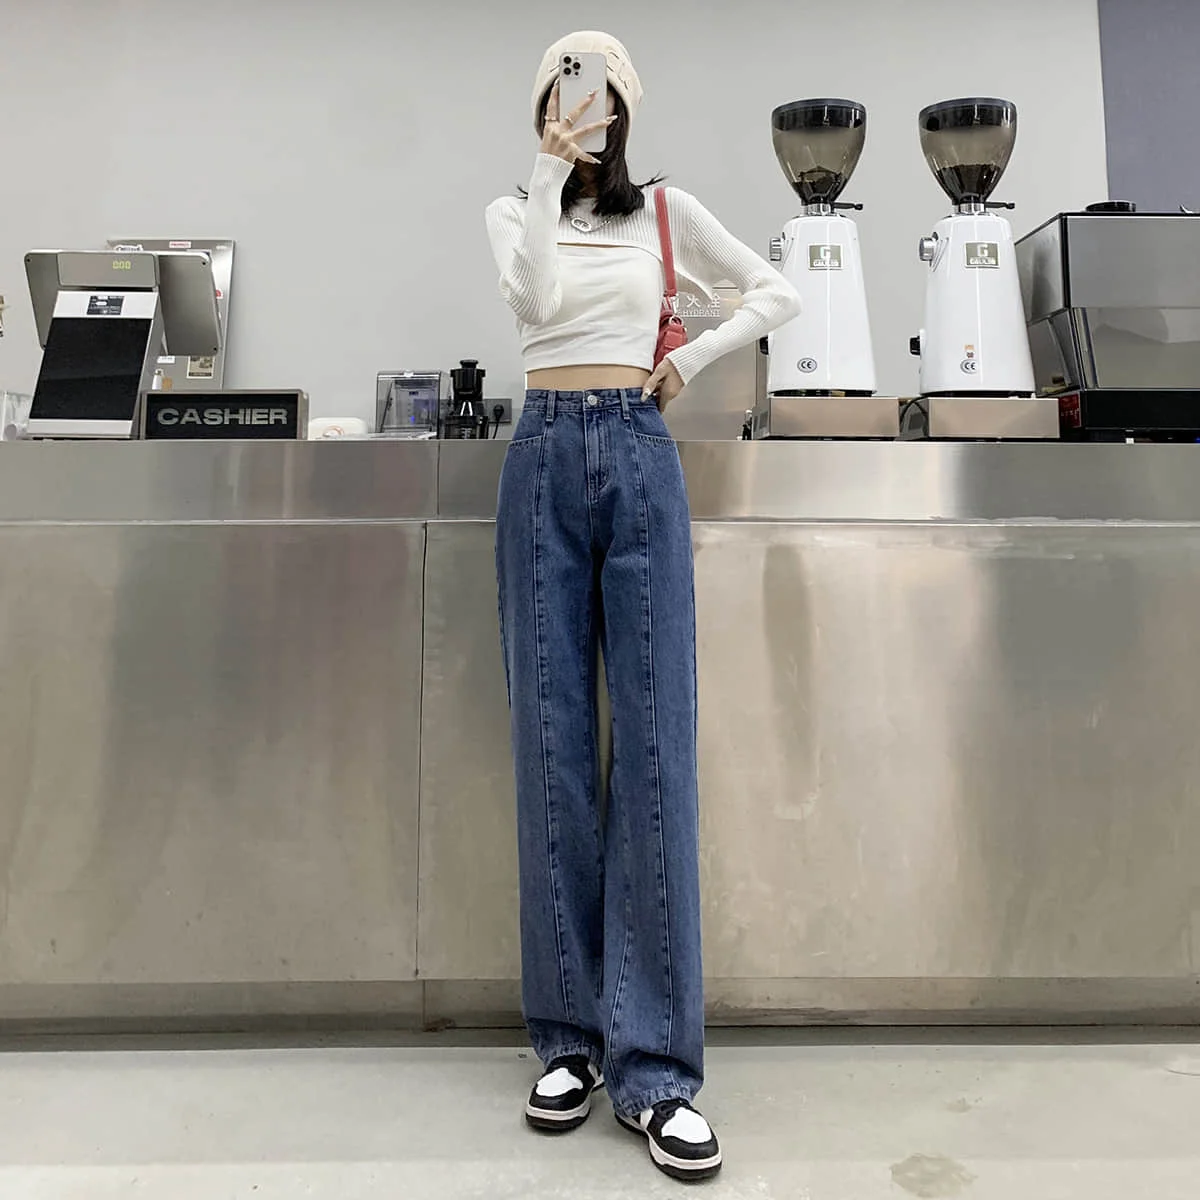 Woman Classic Jeans Luxury Brand Acne Ac Studios Lady Street Fashion Pants High Waist Jeans Female Washed Denim Full Jeans